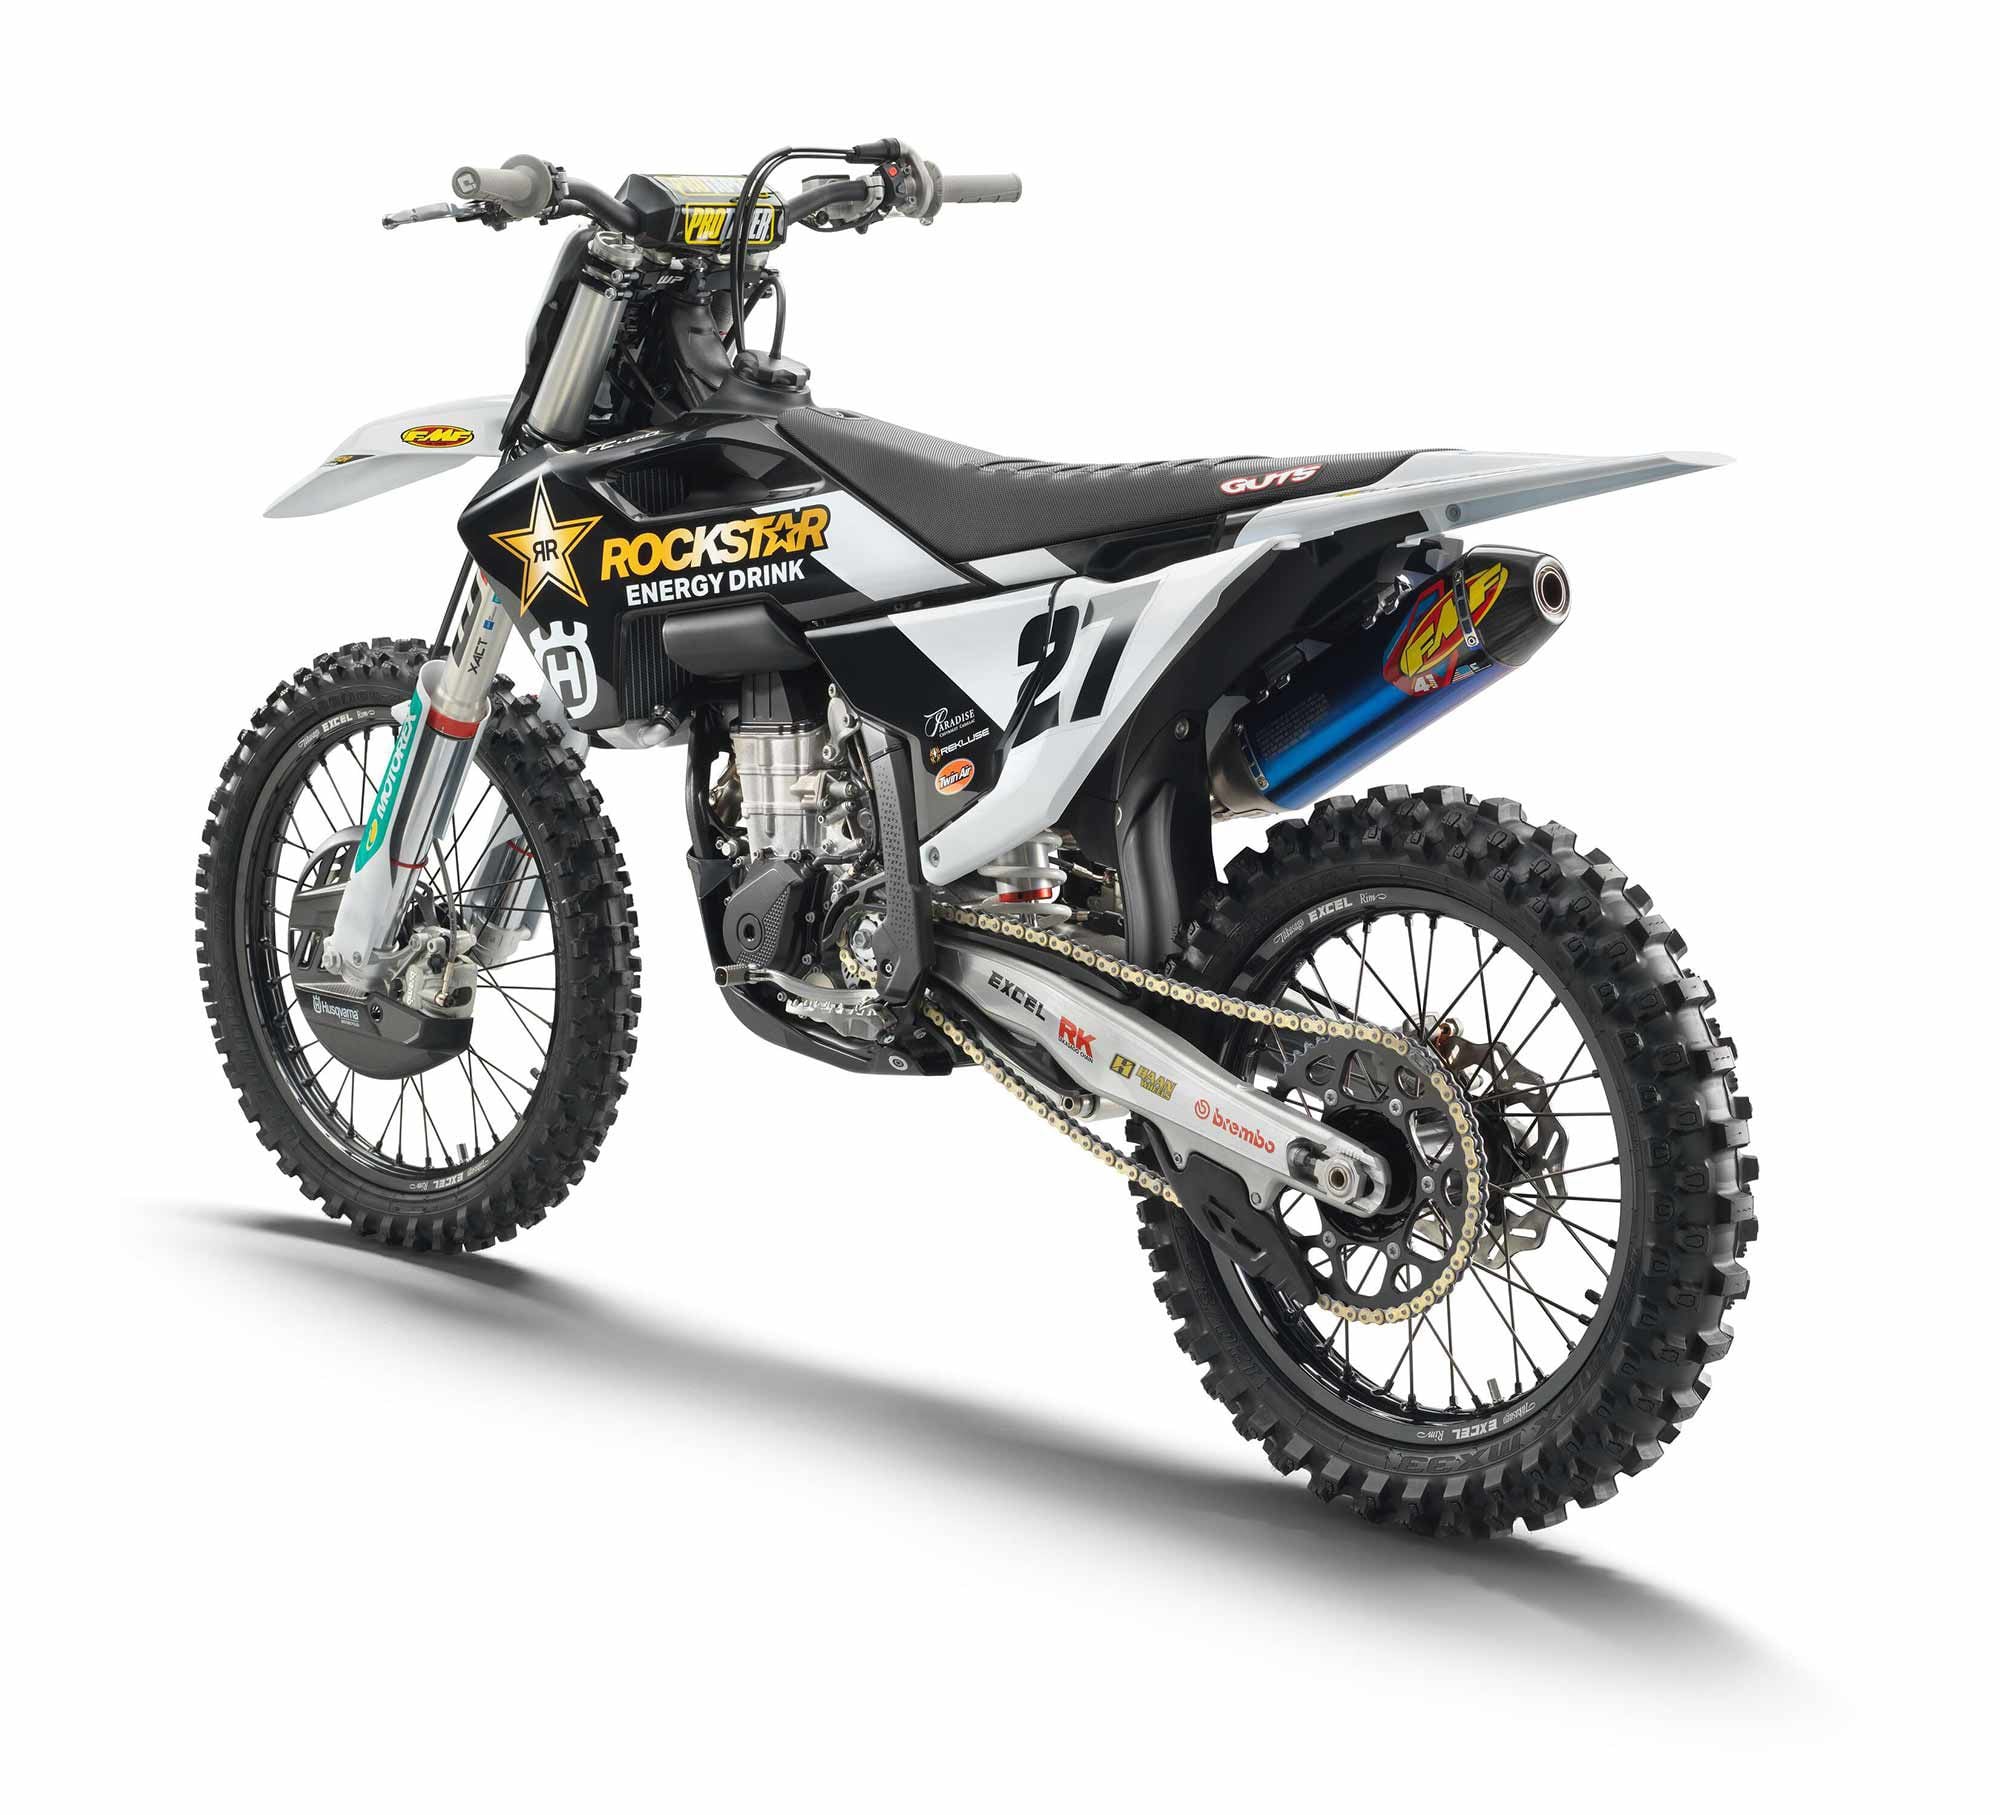 The FC 450 Rockstar Edition has been a part of the Austrian lineup since 2018 and continues to see improvements into 2023.